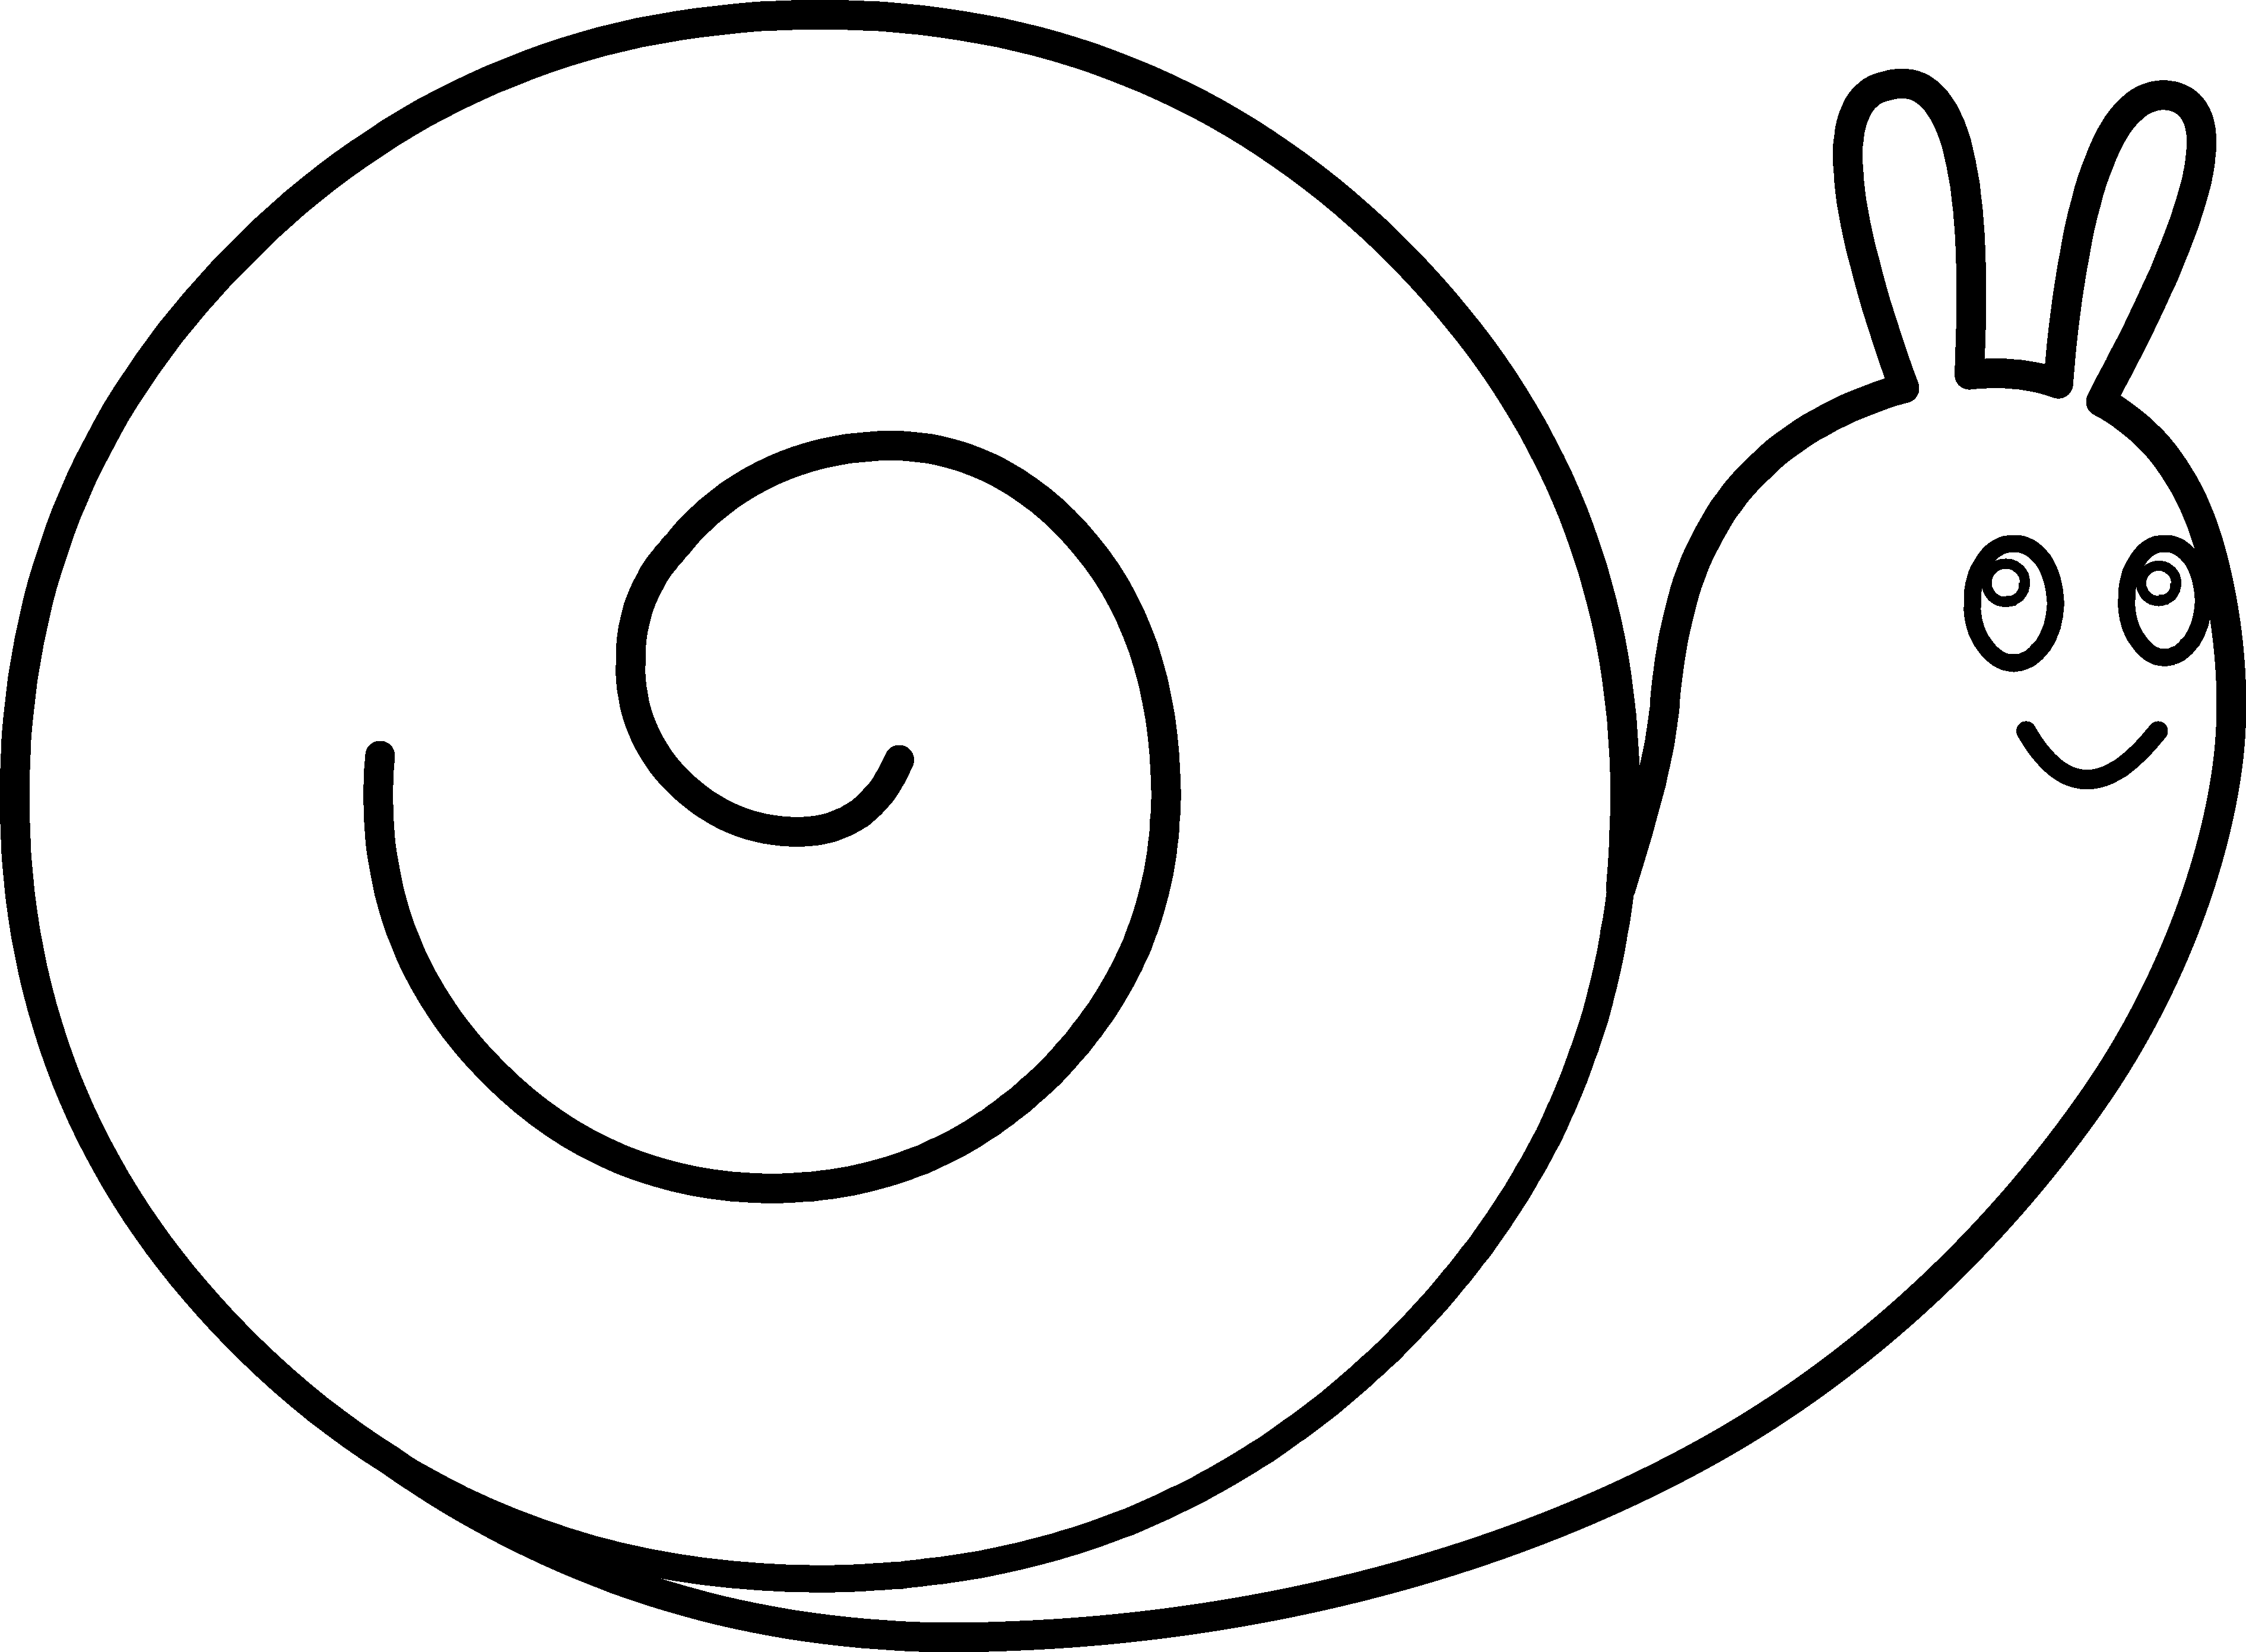 File:Snail (PSF).png